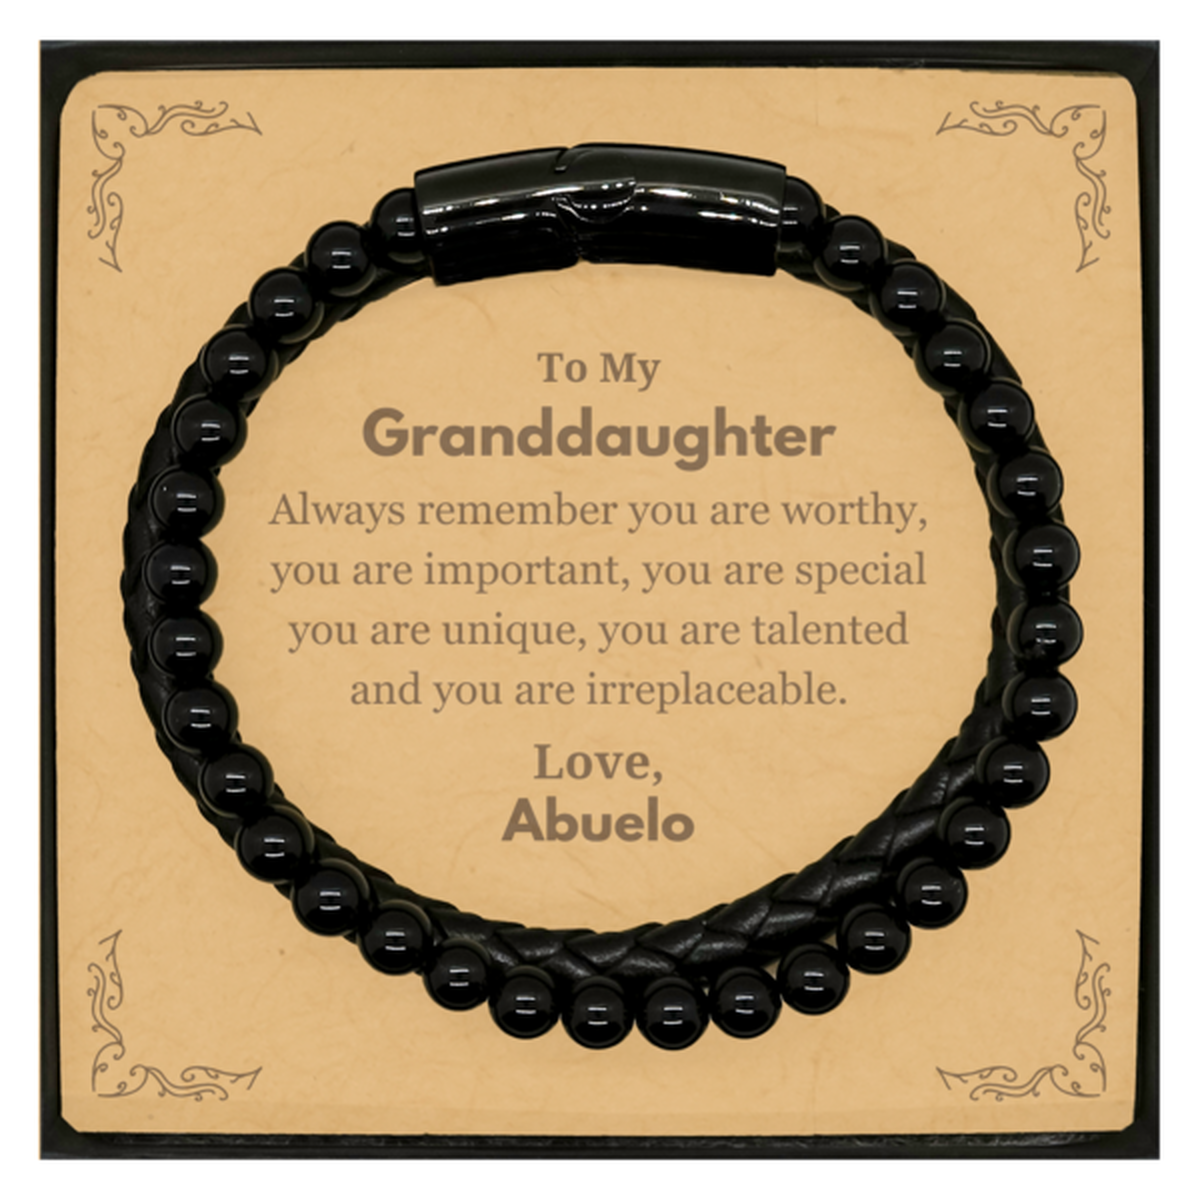 Granddaughter Birthday Gifts from Abuelo, Inspirational Stone Leather Bracelets for Granddaughter Christmas Graduation Gifts for Granddaughter Always remember you are worthy, you are important. Love, Abuelo